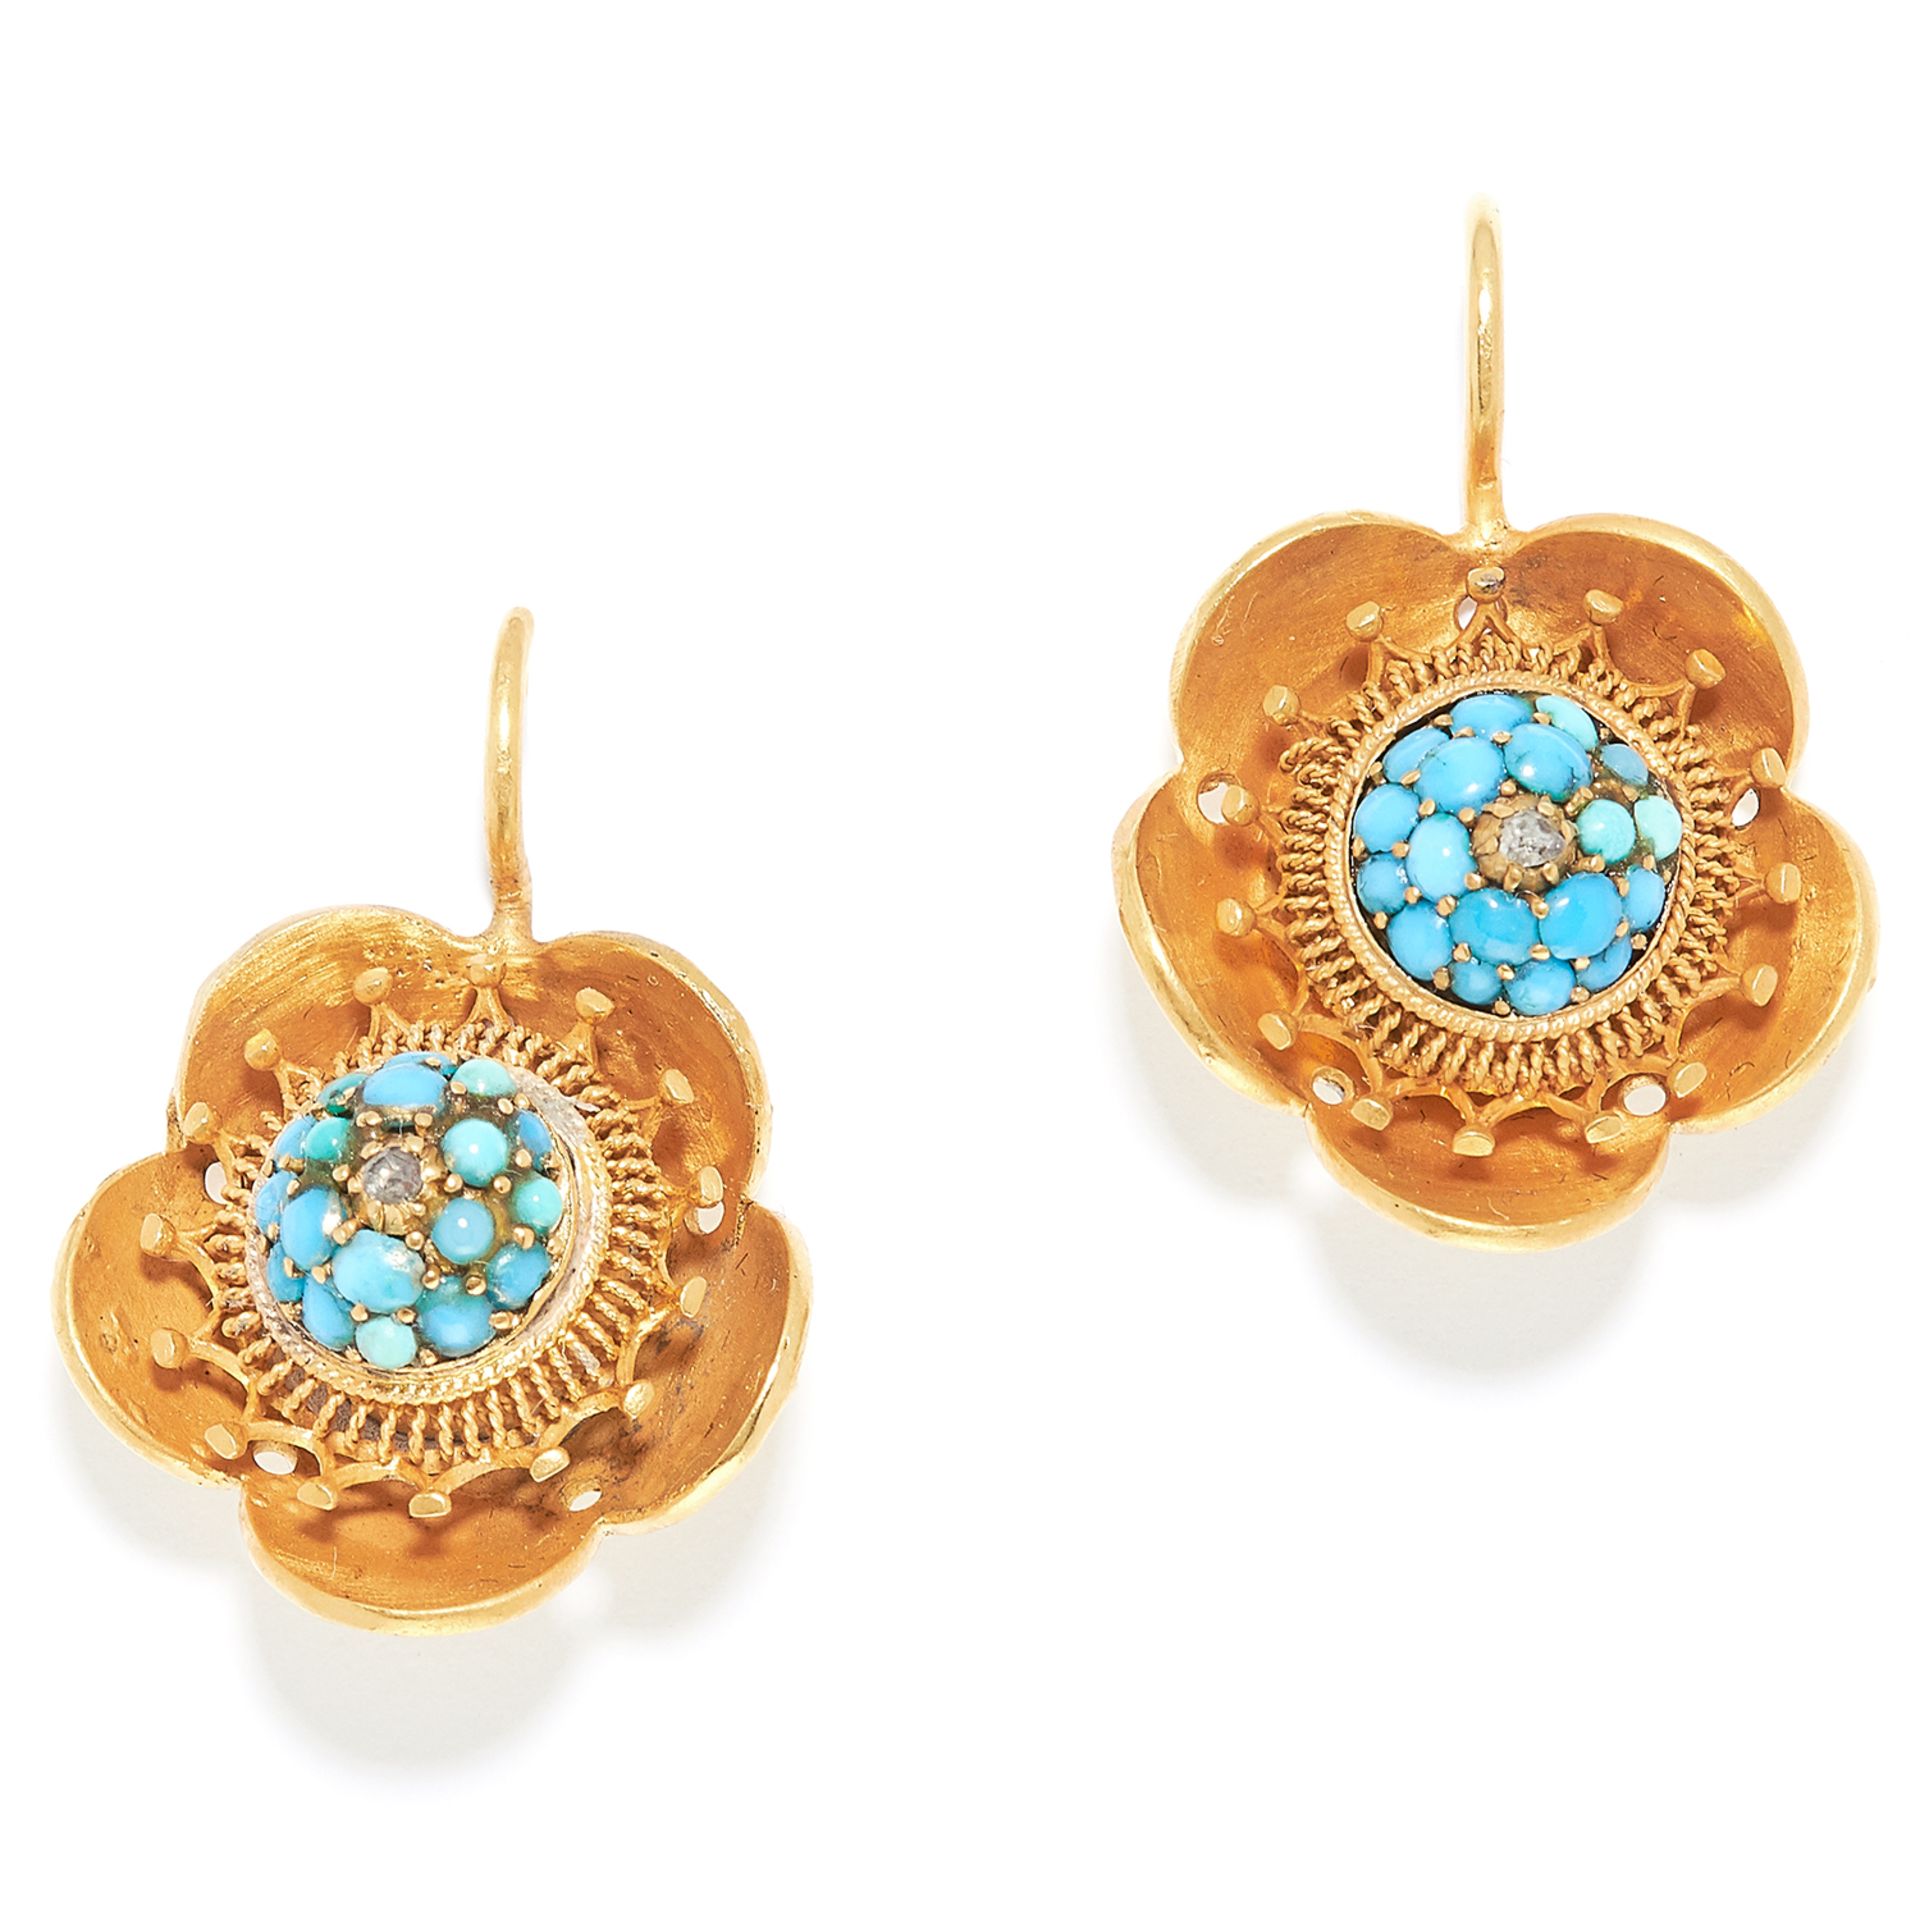 ANTIQUE TURQUOISE AND DIAMOND EARRINGS, 19TH CENTURY in high carat yellow gold, the floral designs